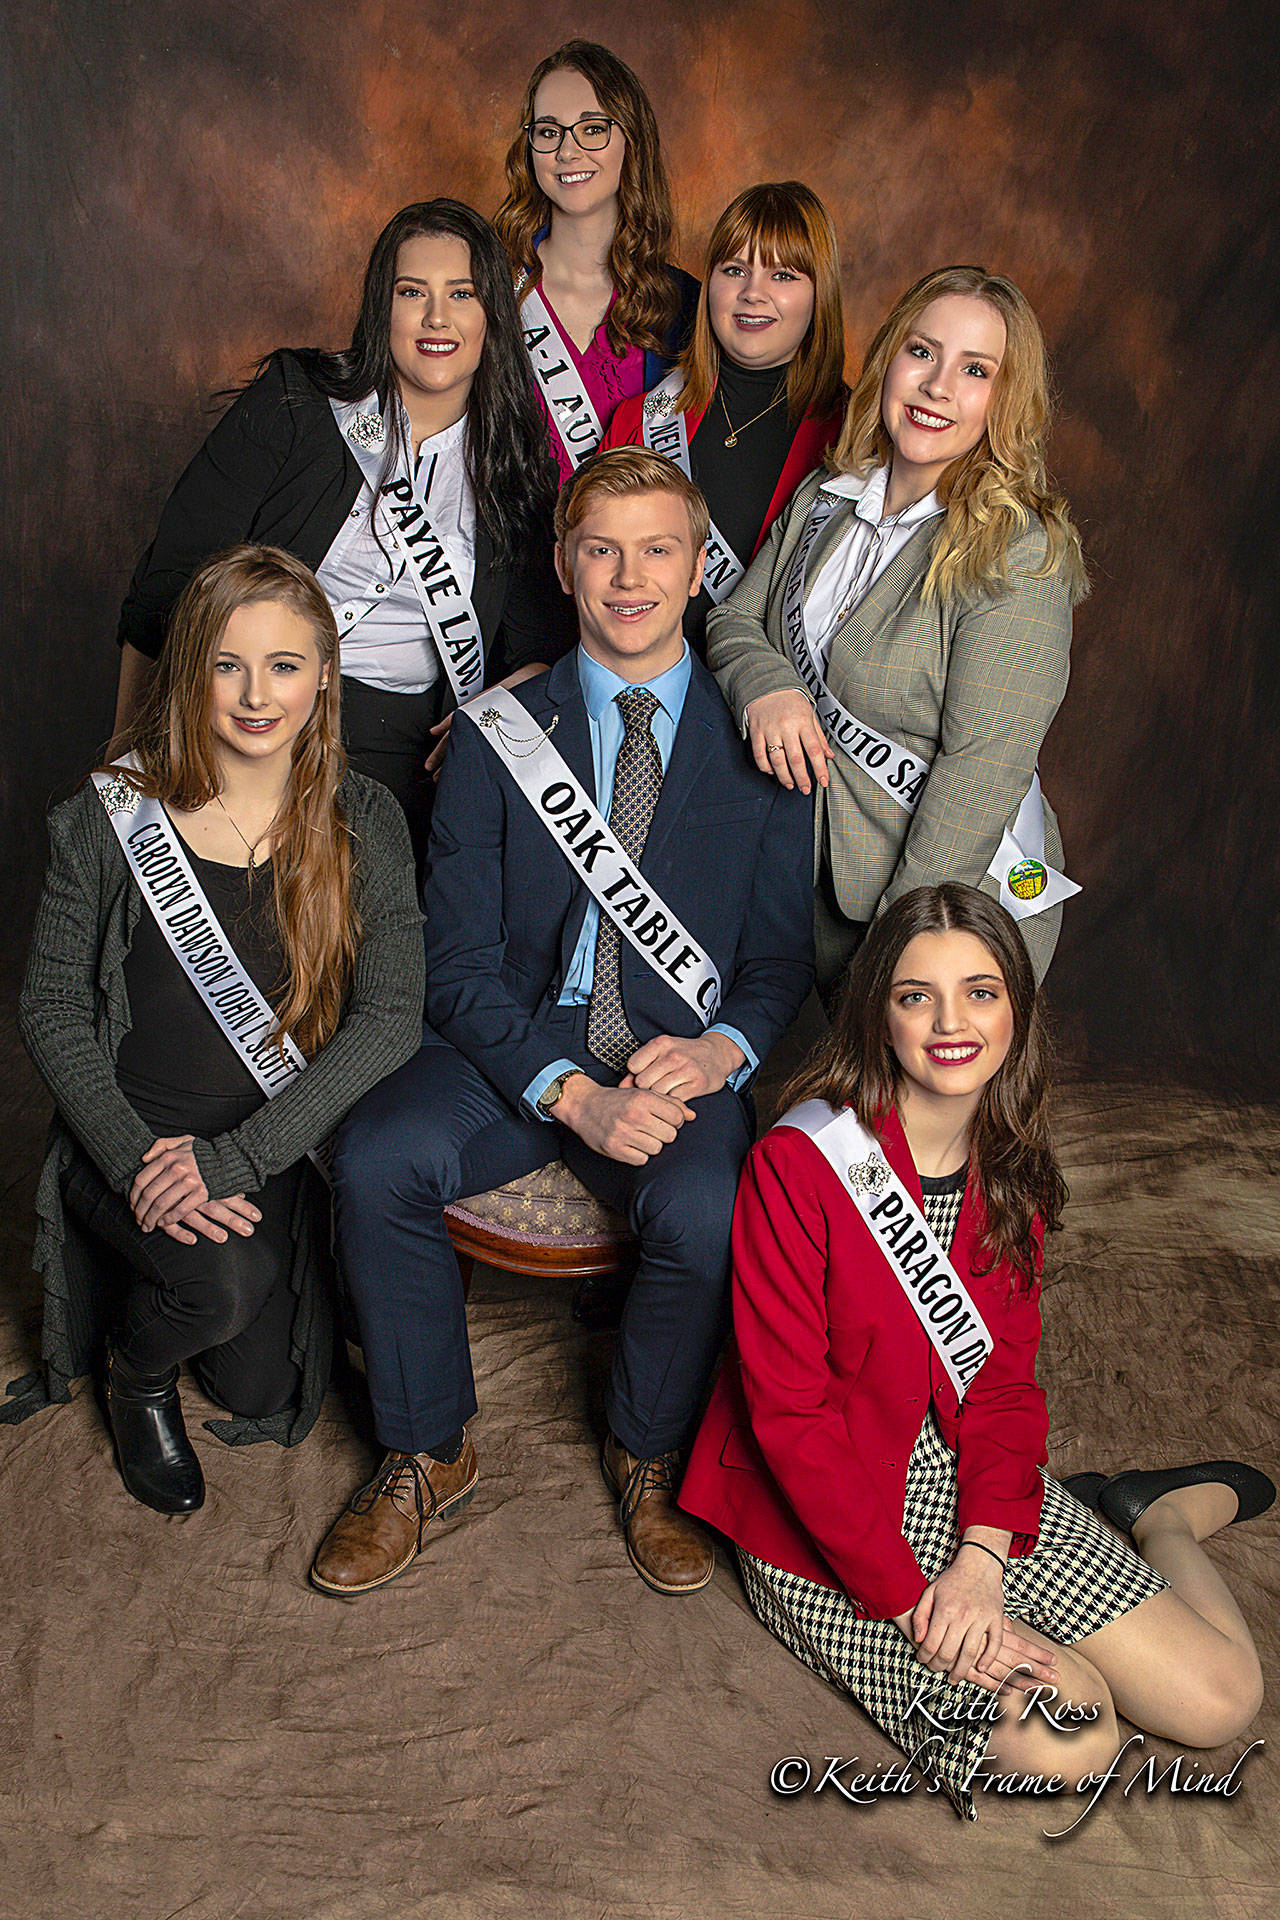 This year’s Sequim Irrigation Festival royalty candidates on March 7 include, from top clockwise, Sydney VanProyen, Brii Hengtgen, Olivia Preston, Alicia Pairadee, Logan Laxson, Lindsey Coffman, and Mya Janssen. Photo by Keith Ross/Keith’s Frame of Mind